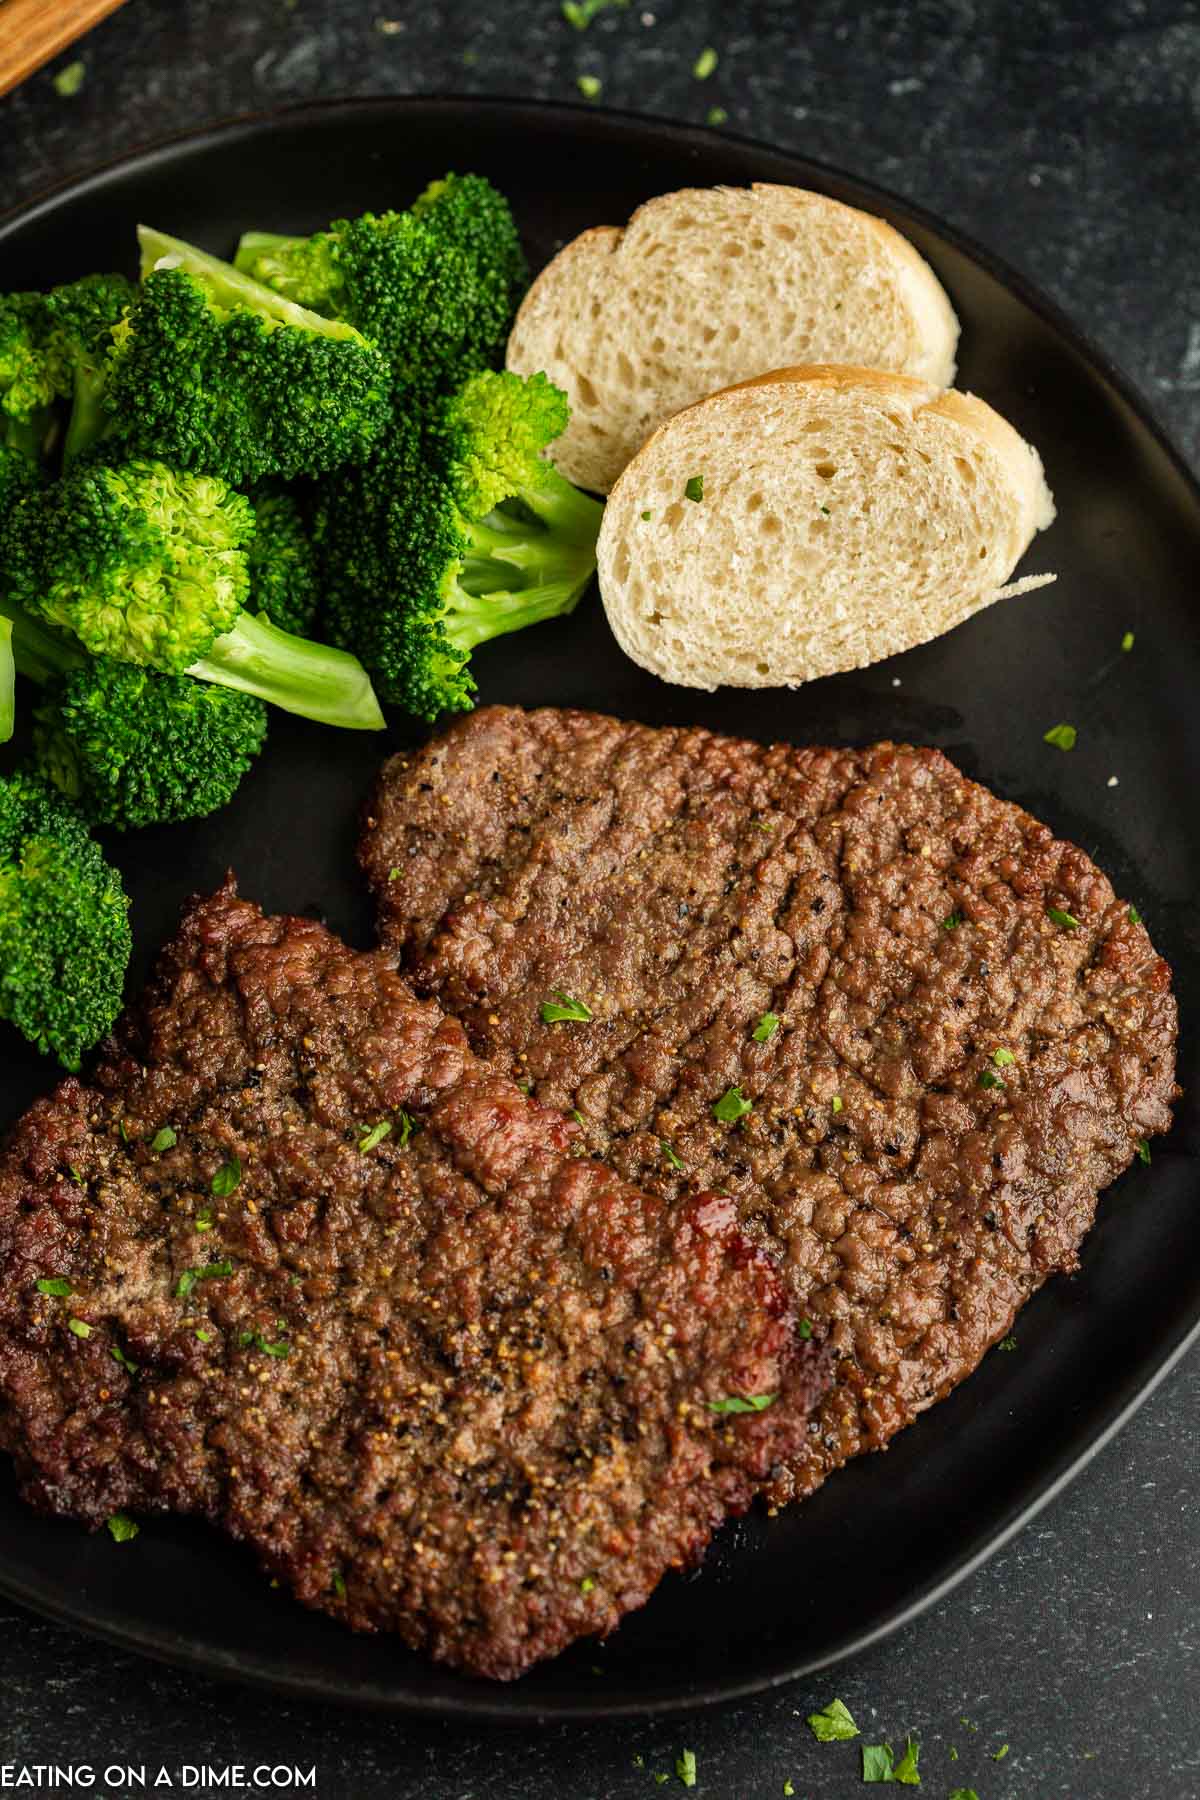 Cube steak on a plate with broccoli and french bread